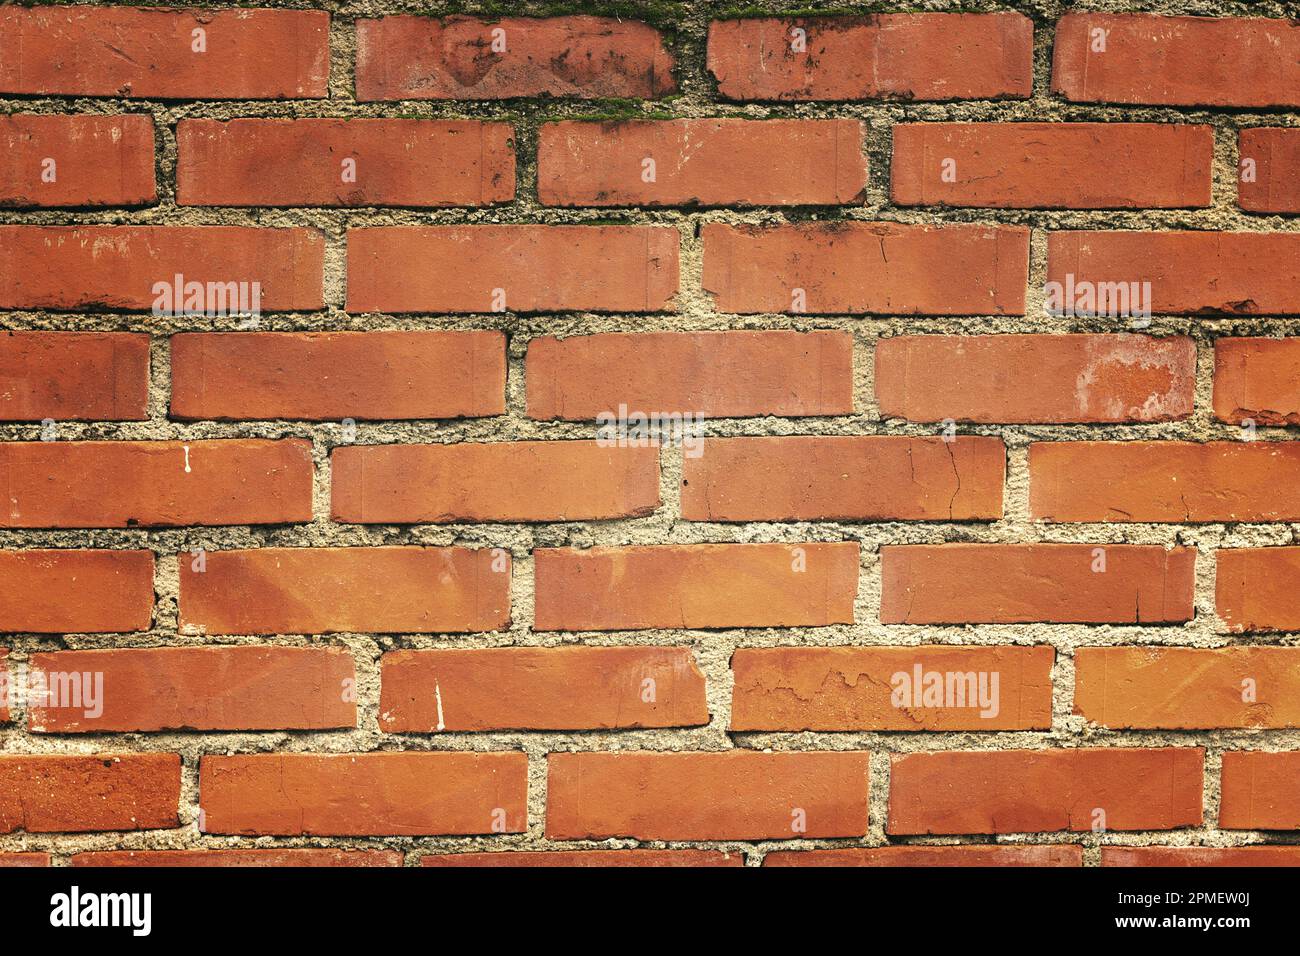 Horizontal Vector Illustration Of Red And White Color Vertical Blocks Over  Brick Pattern Wall Texture Grunge Background High-Res Vector Graphic -  Getty Images